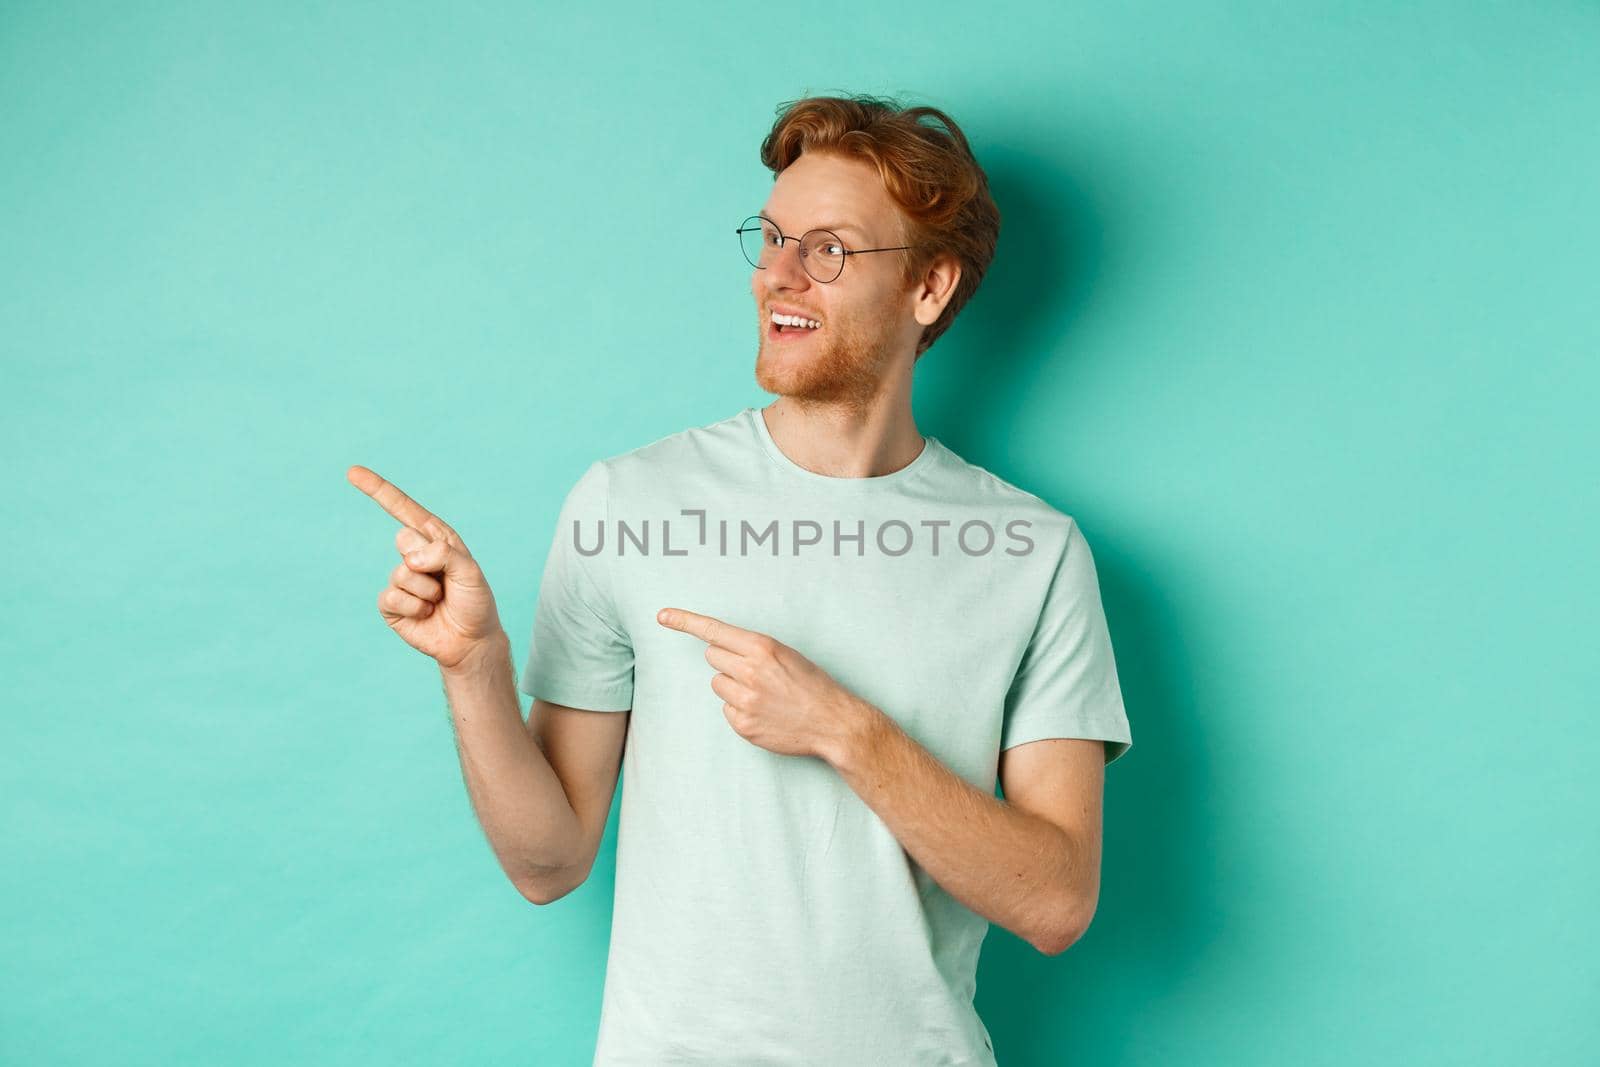 Handsome young man with red hair and beard, wearing glasses and t-shirt, pointing and looking left with amused face, checking out advertisement on copy space, mint background.